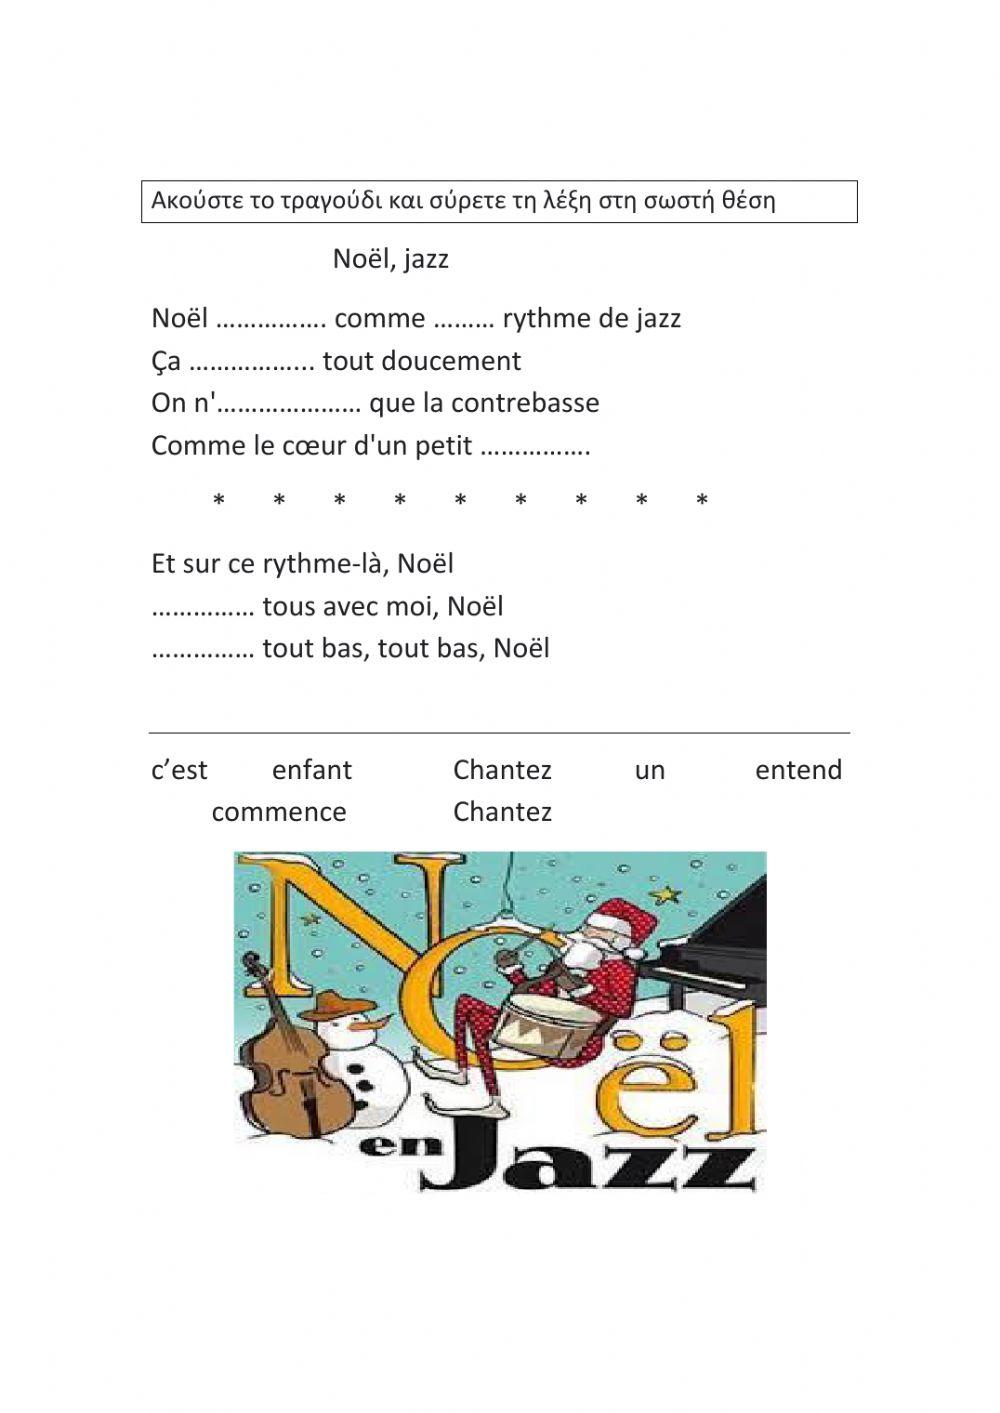 Noël, jazz! online exercise for